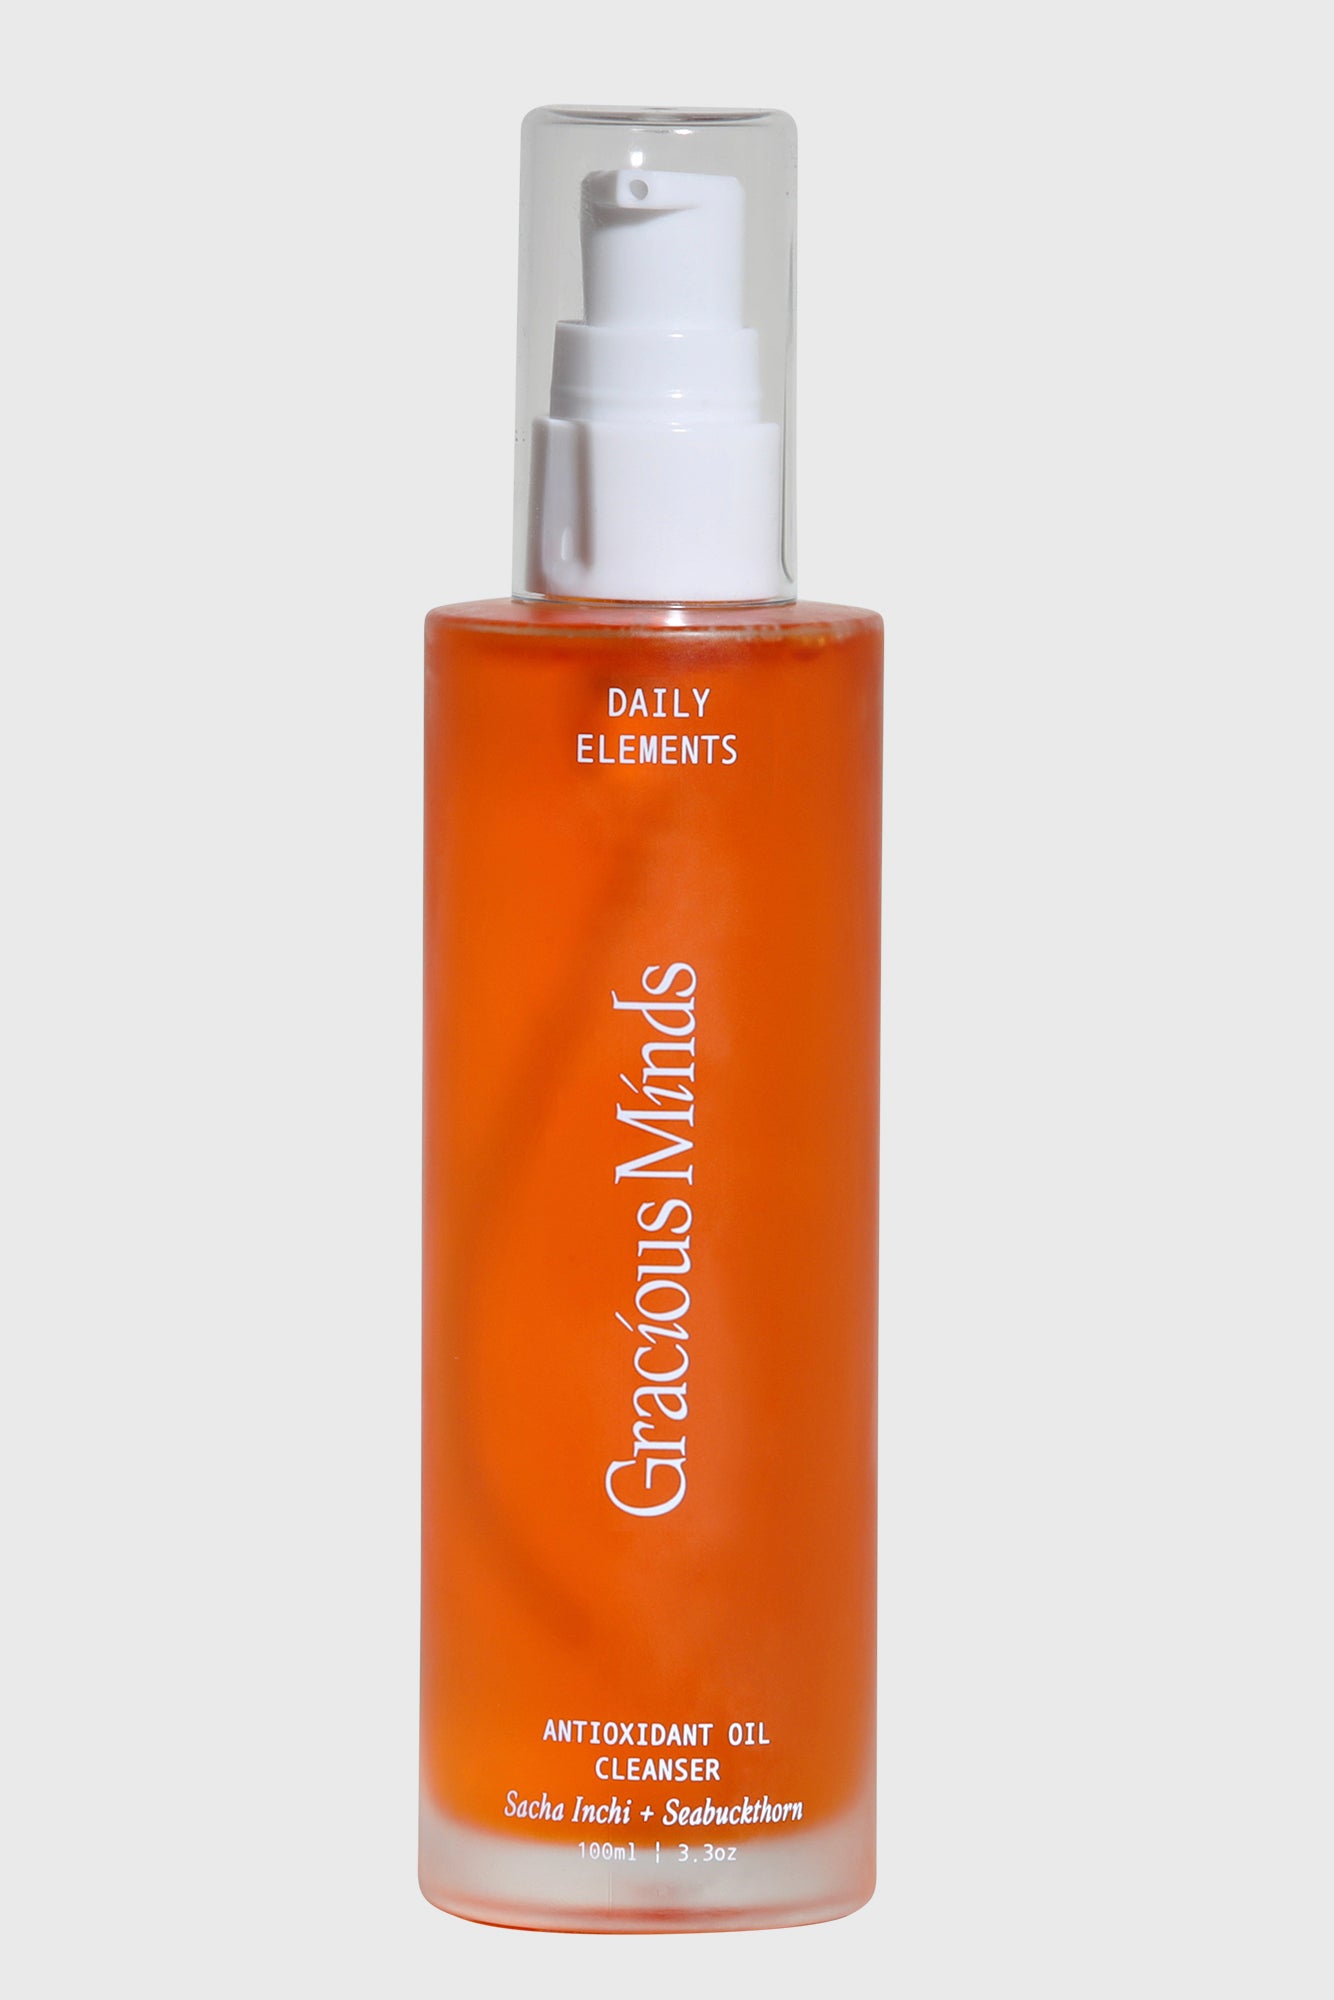 Daily Elements Oil Cleanser